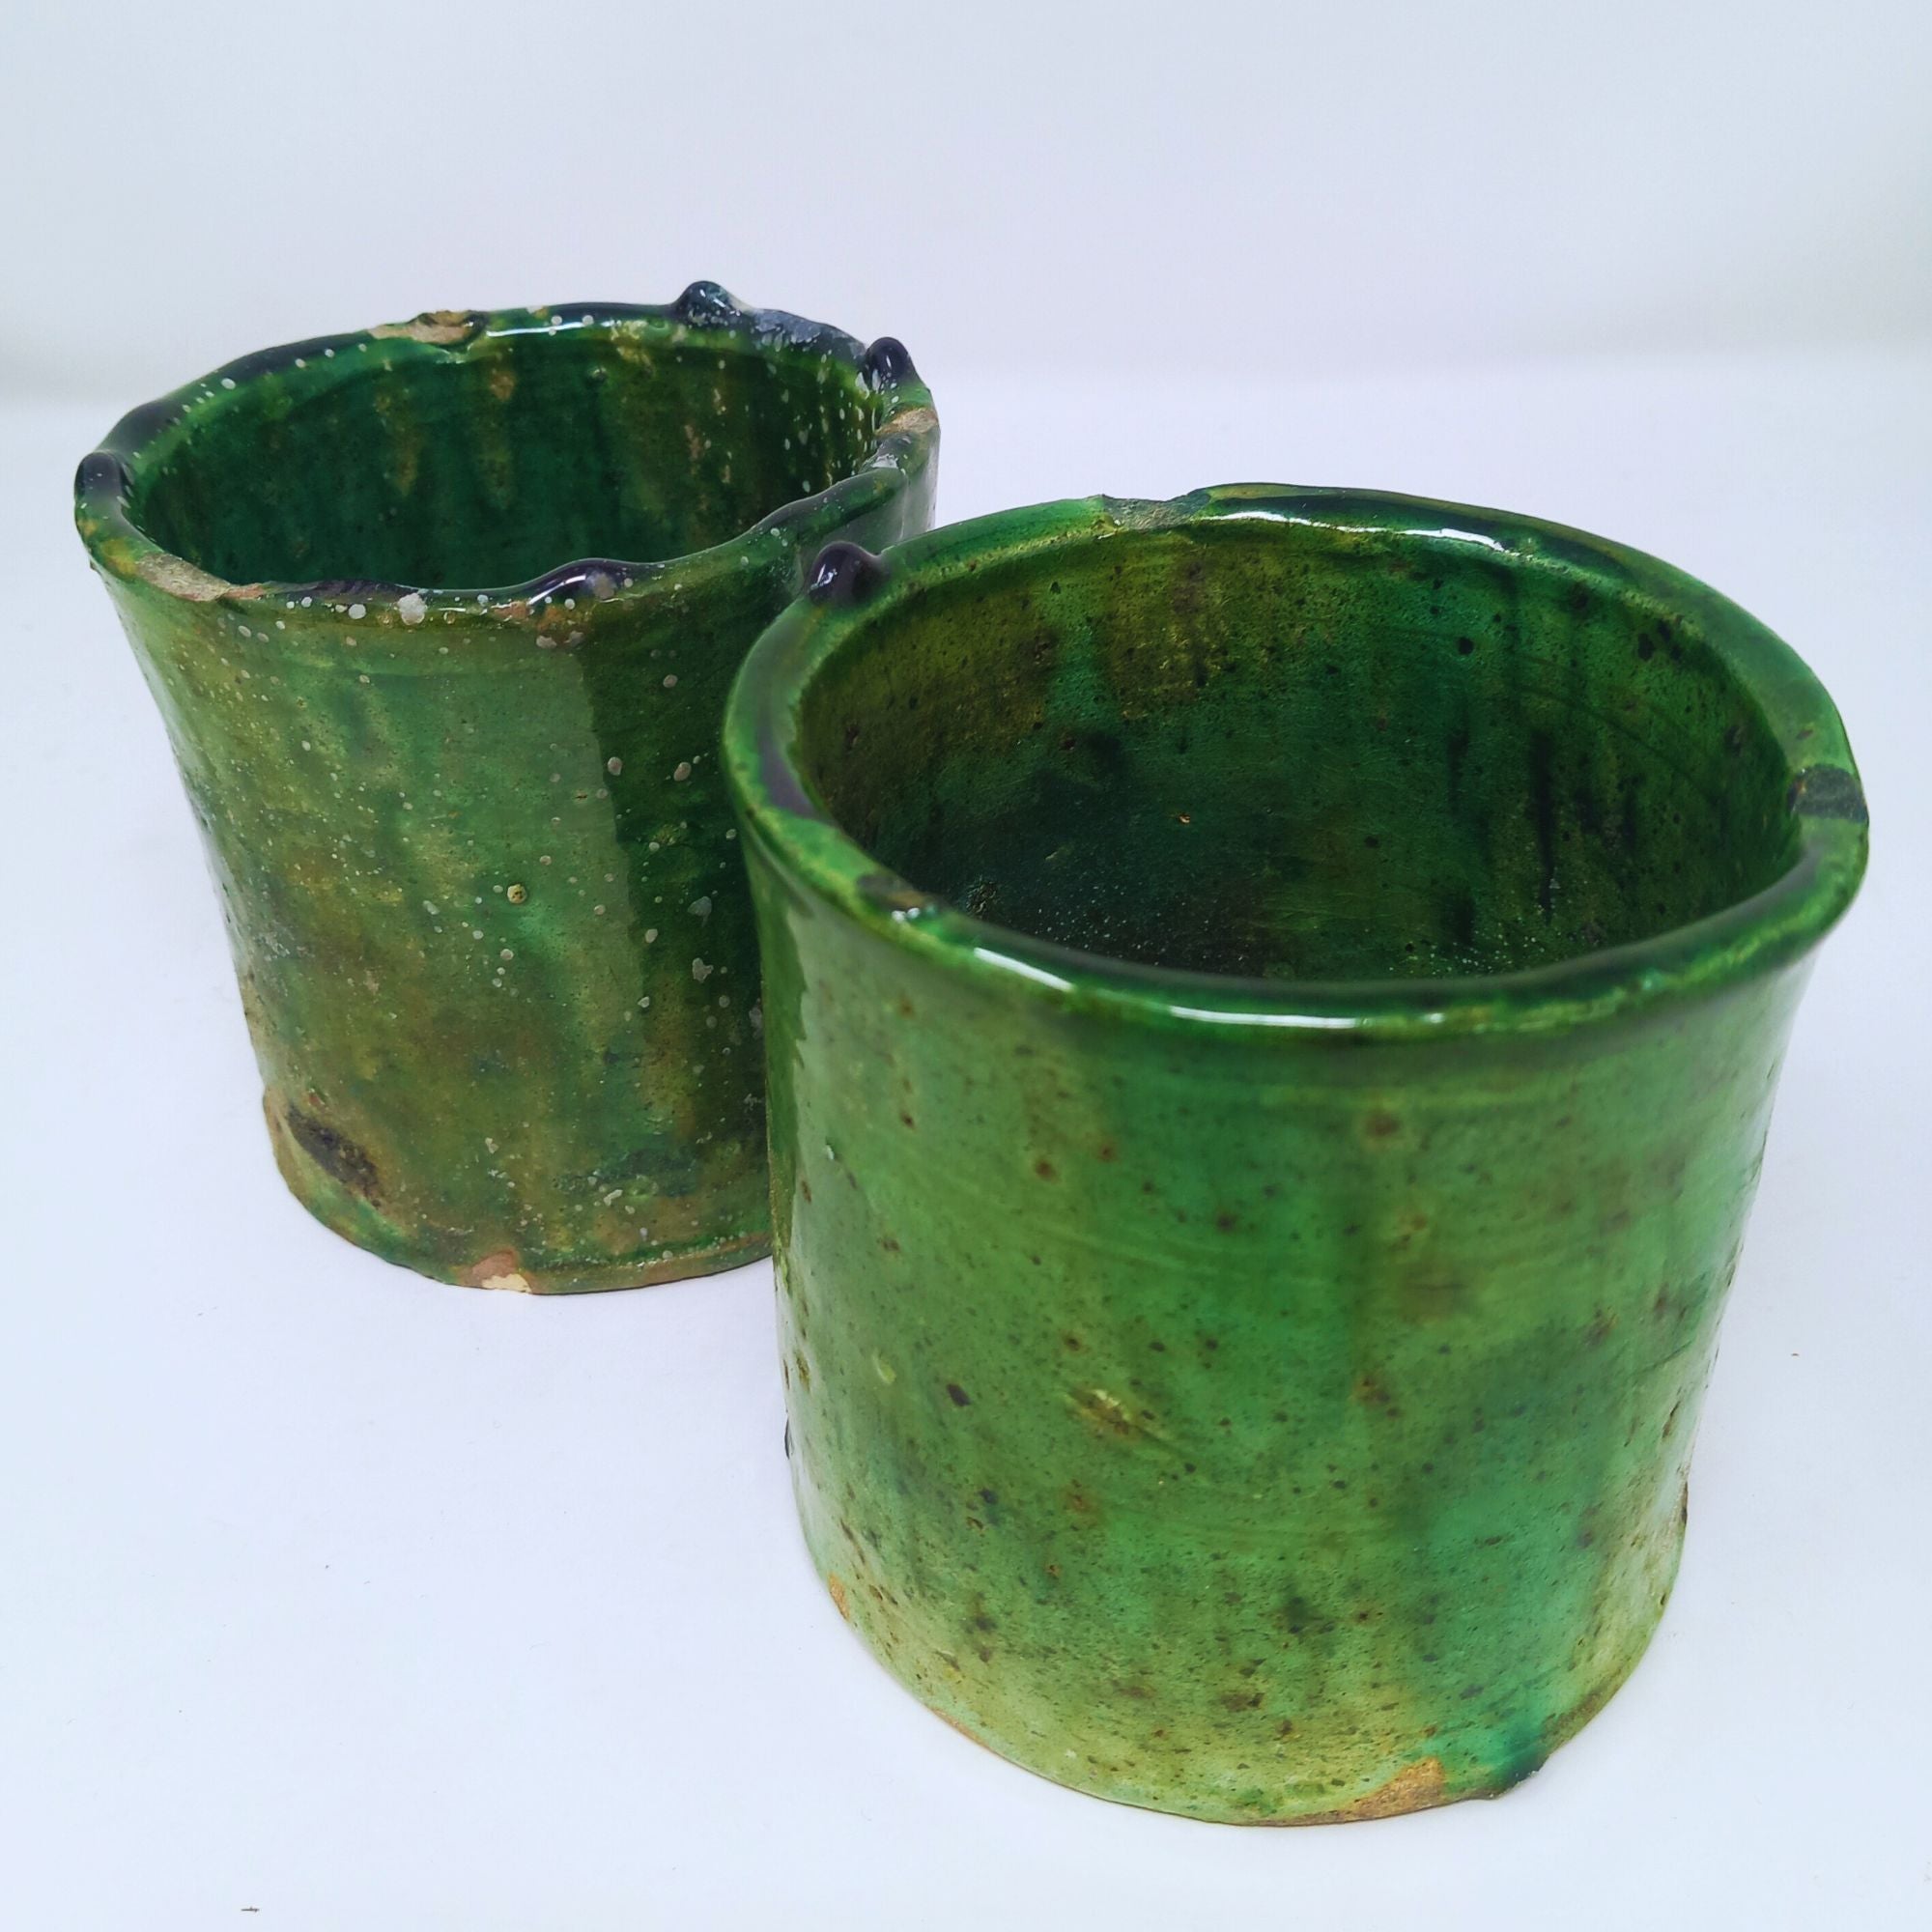 picture of two tamegroute pots in dark green hues